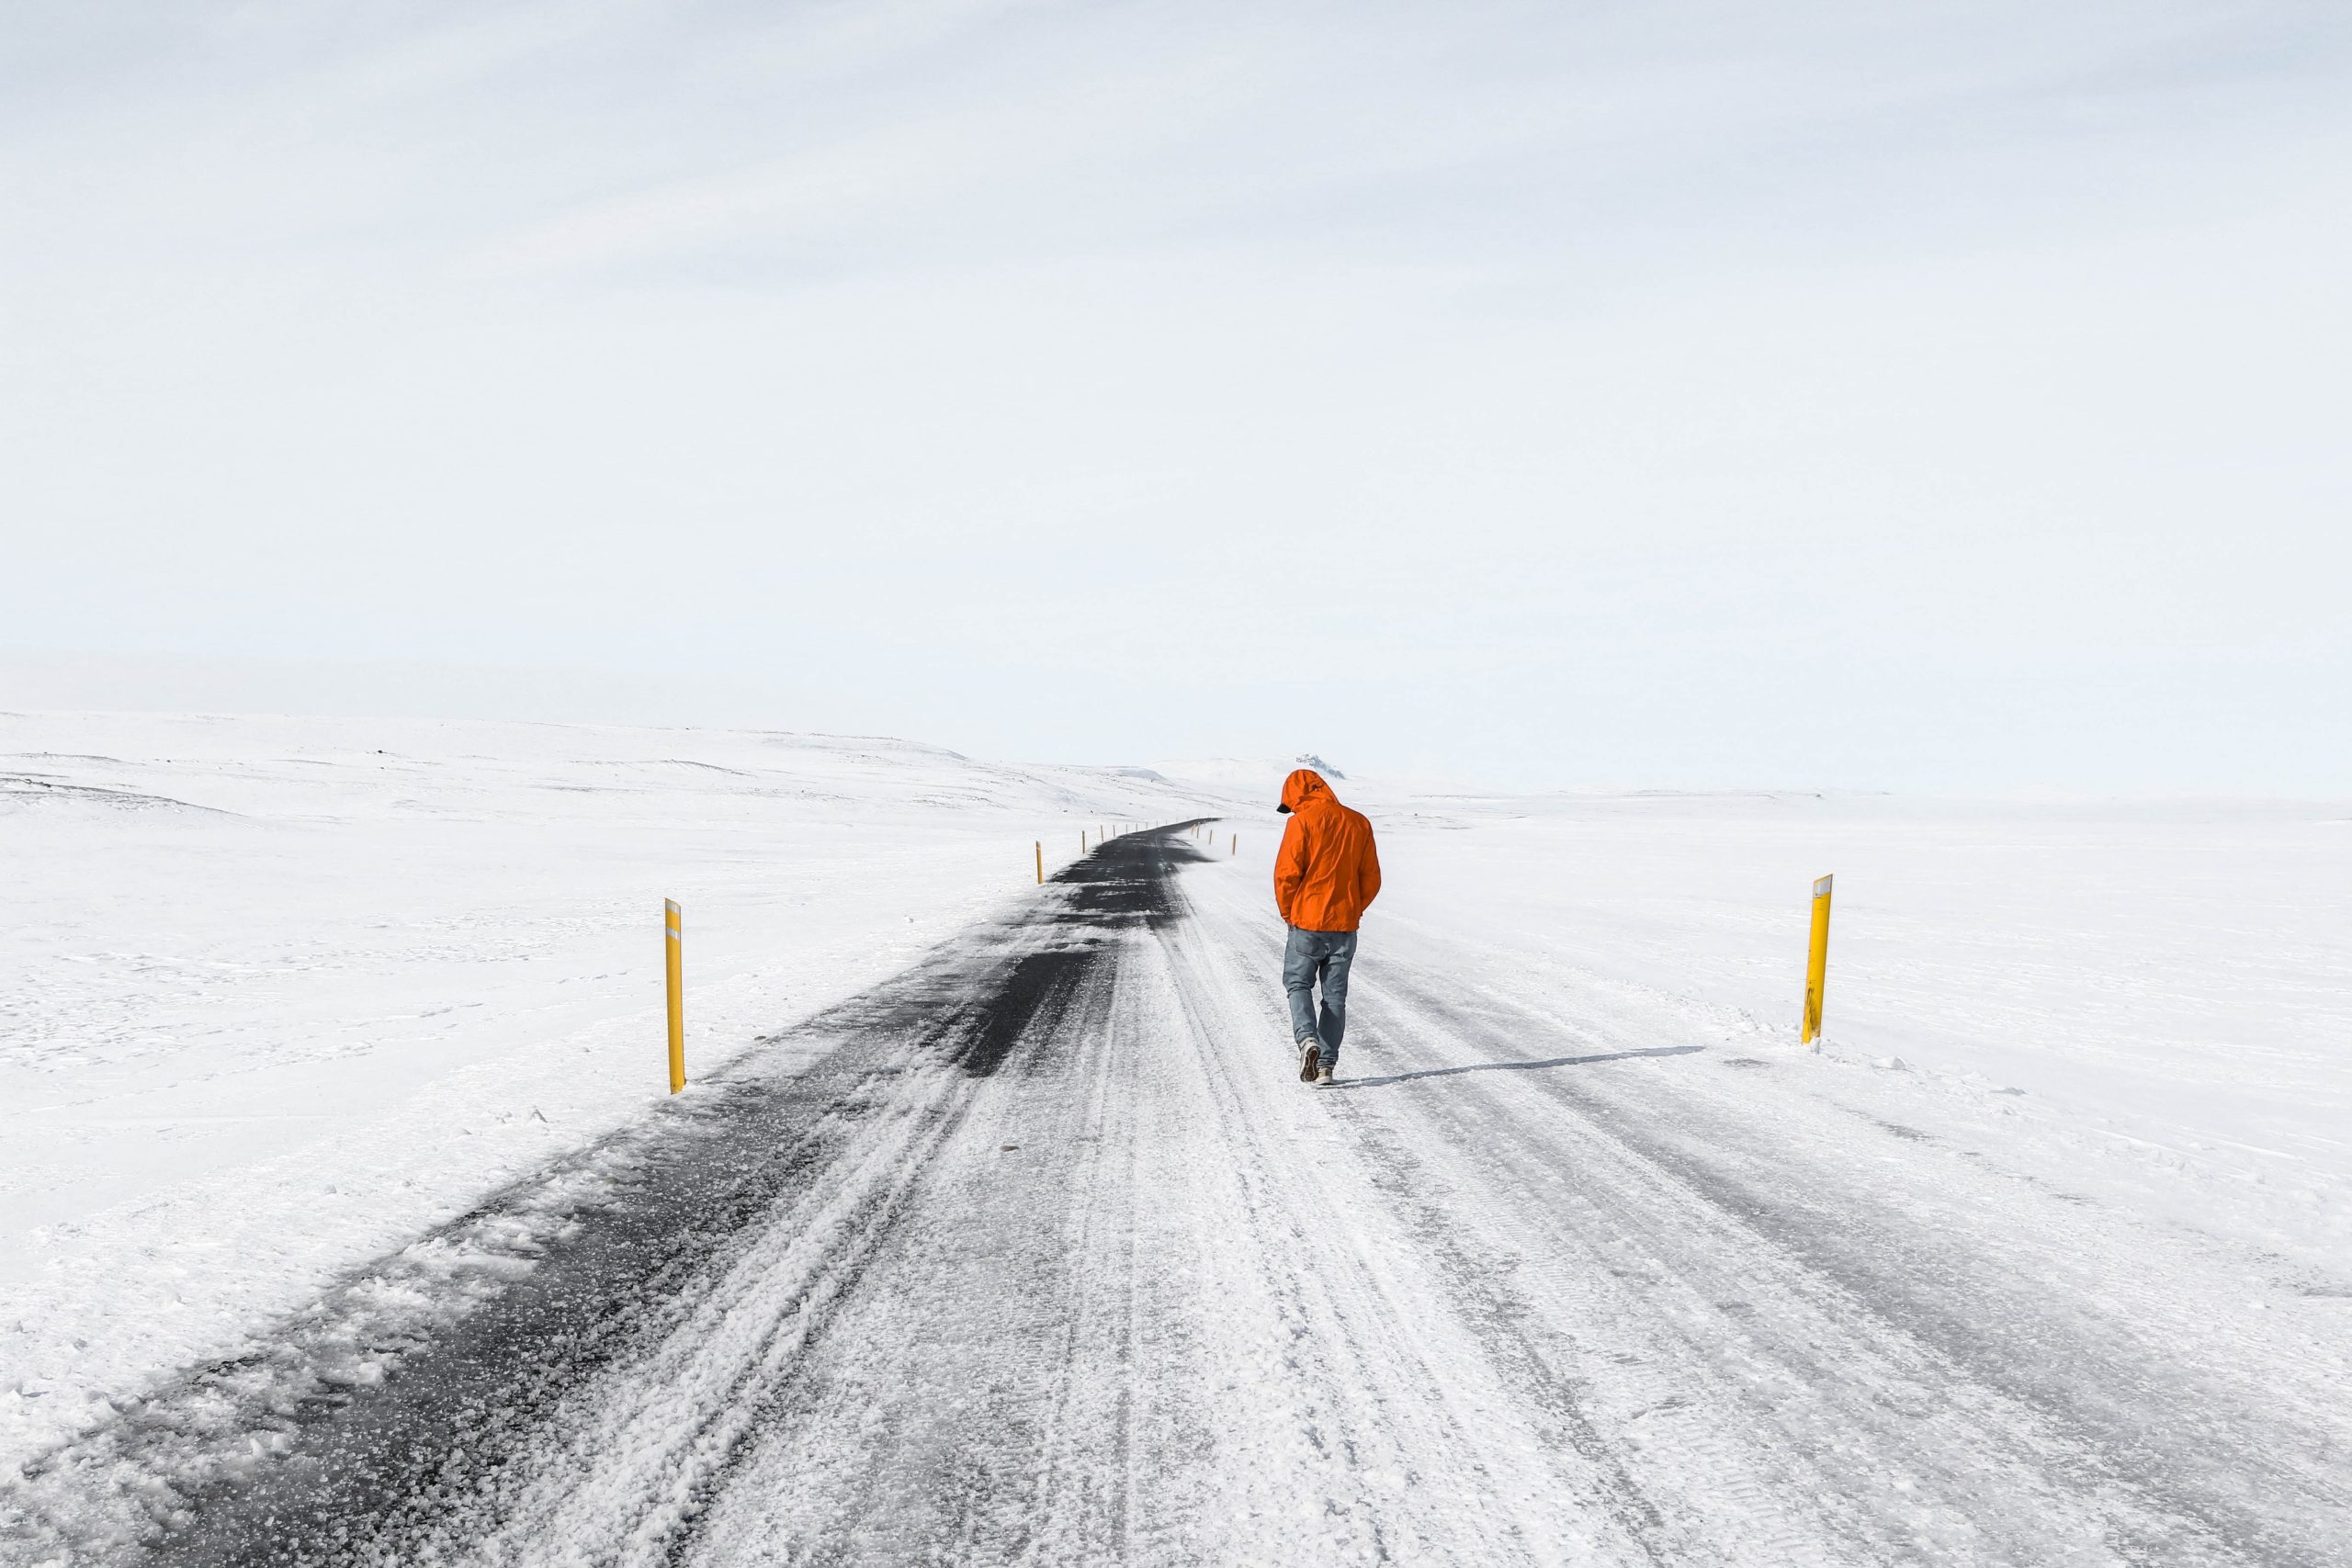 How to Find Mammoth Road Conditions